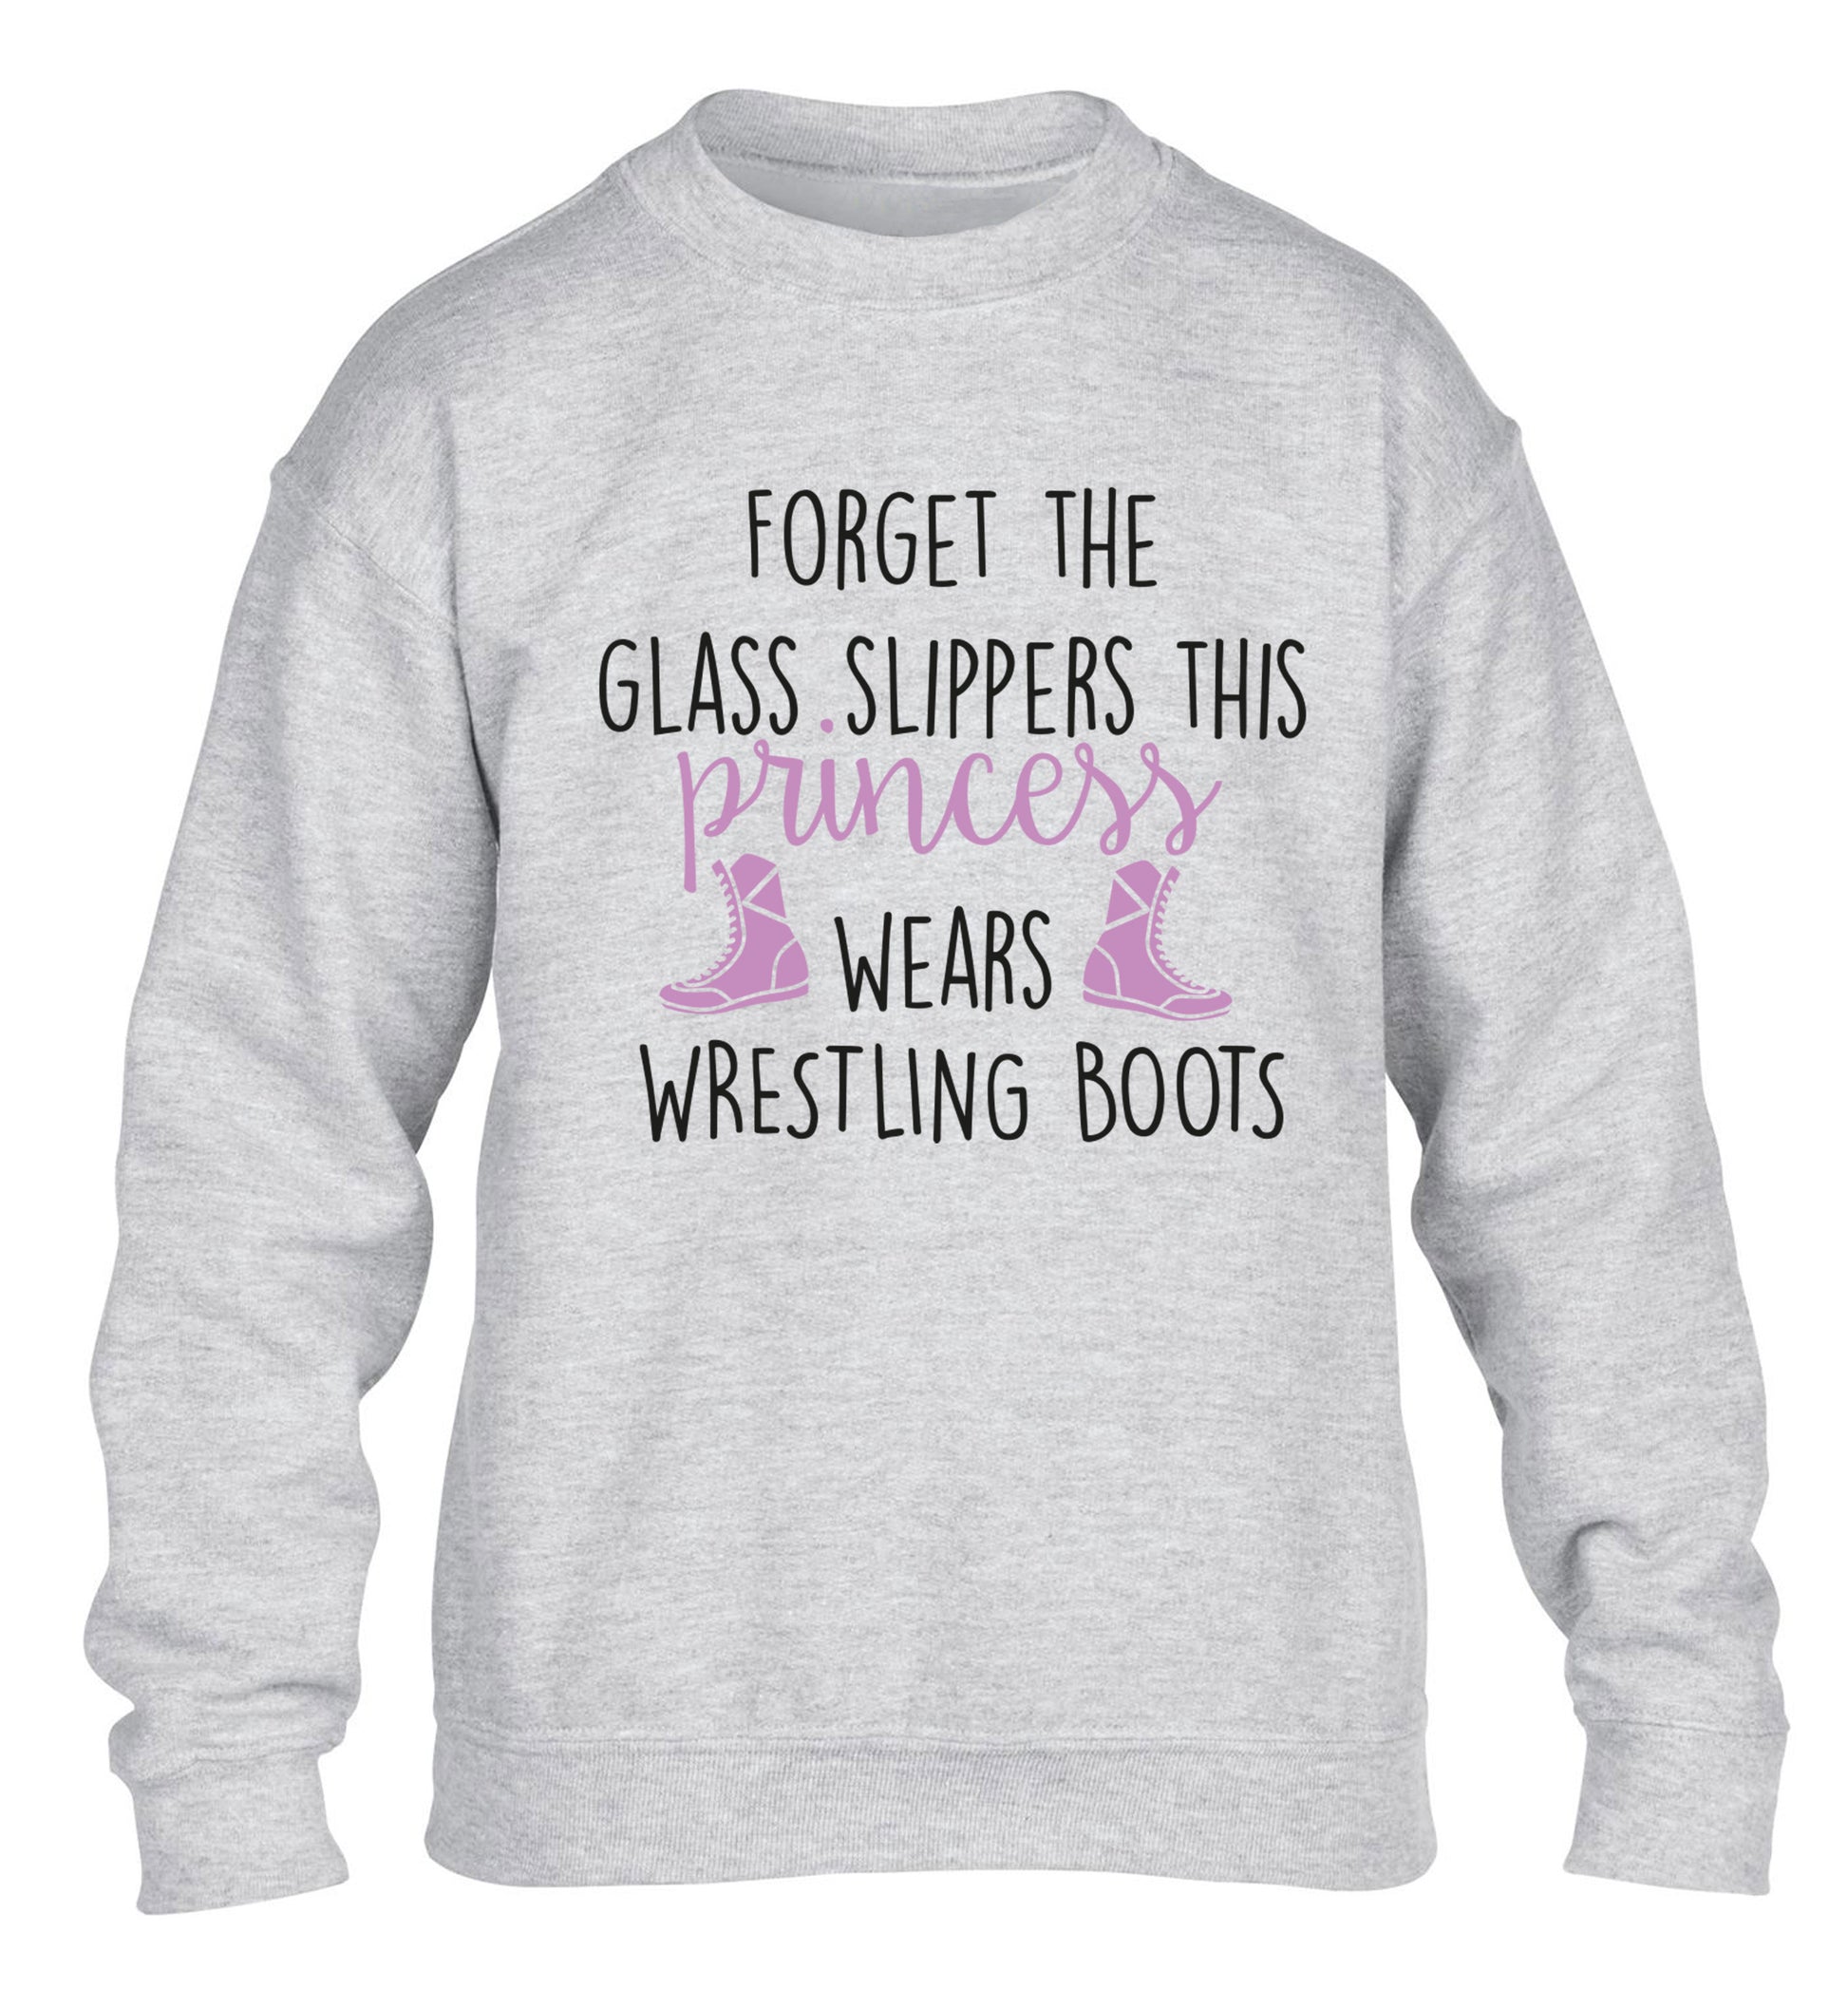 Forget the glass slippers this princess wears wrestling boots children's grey sweater 12-14 Years